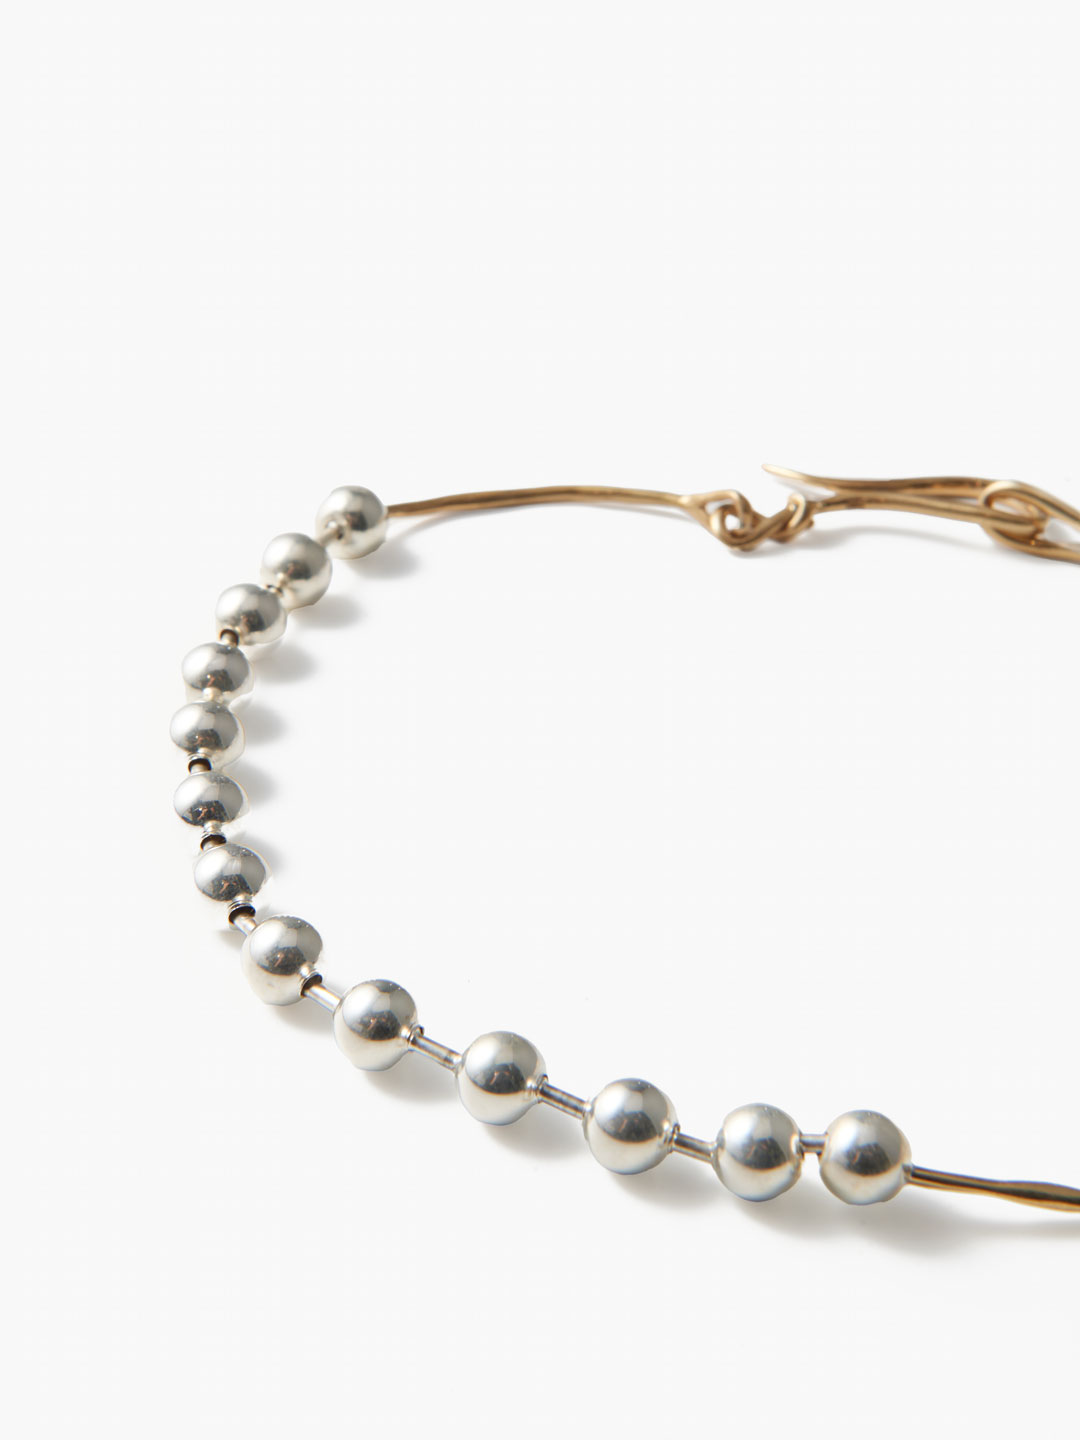 Wireball Necklace - Silver/Gold